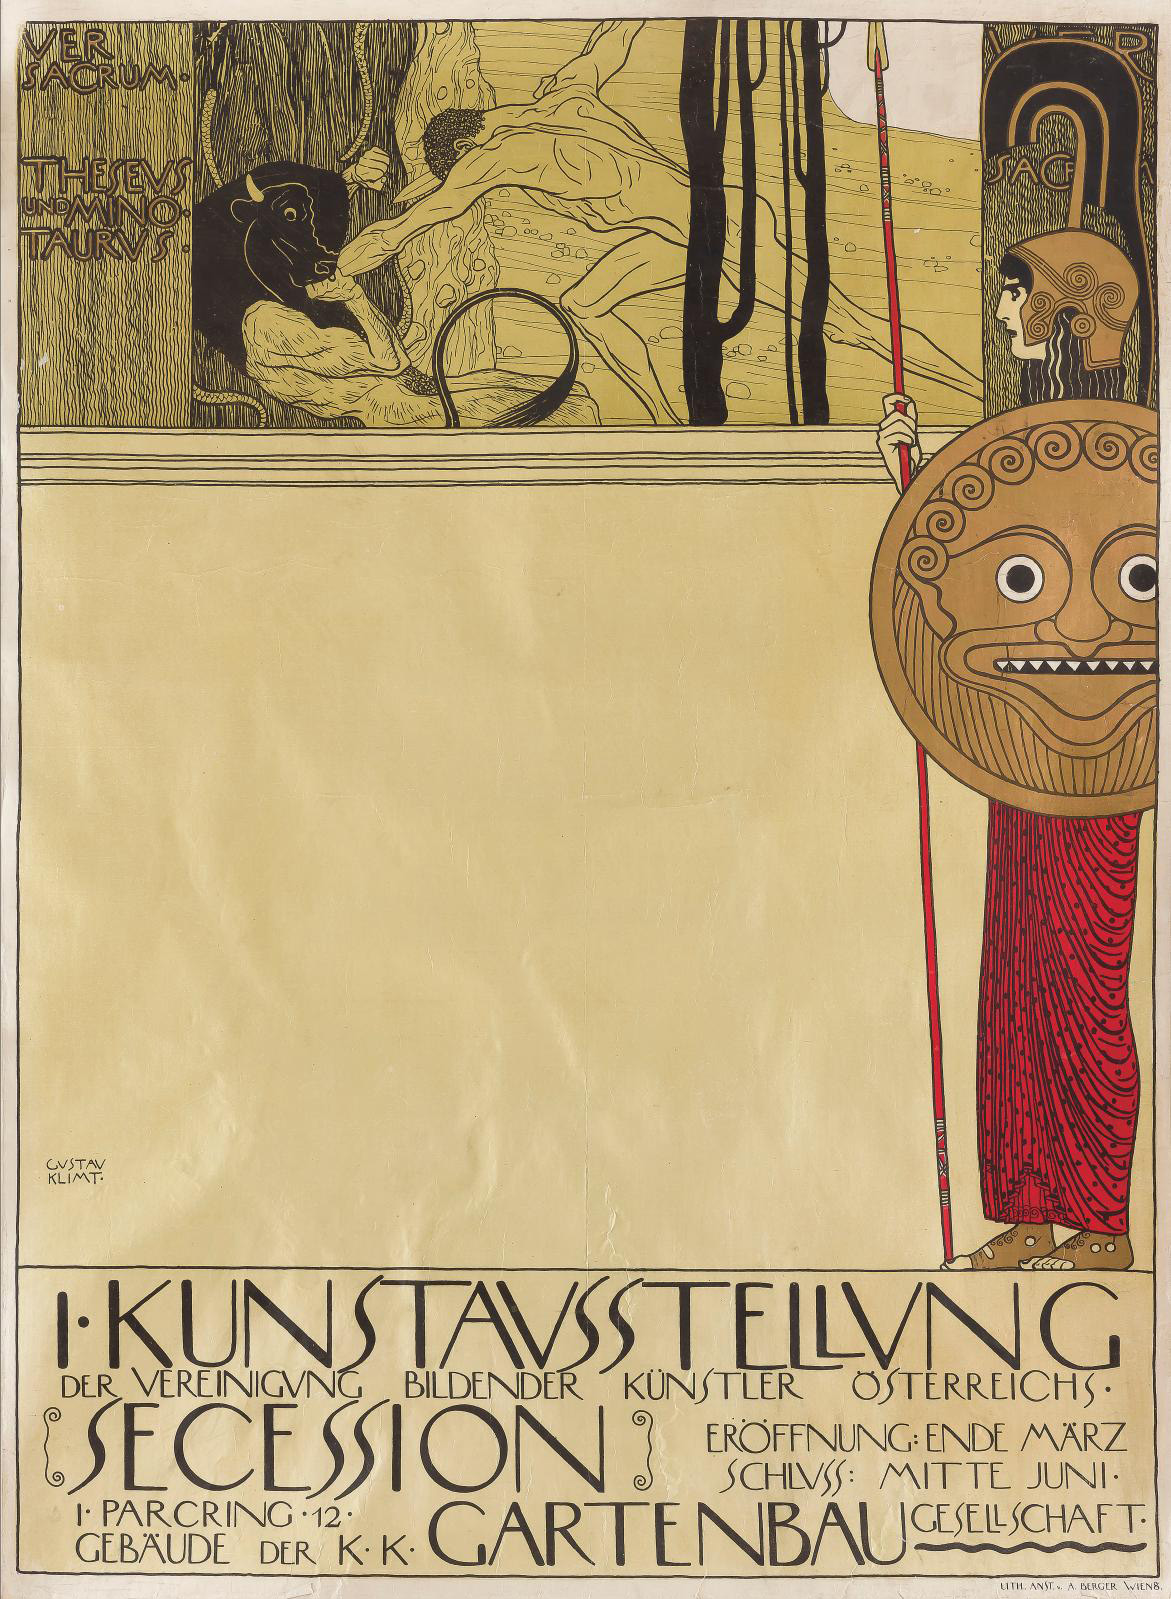 €53,760 greeted this extremely rare poster (97 x 71 cm/38.2 x 28 in.) produced by Gustav Klimt (1862-1918) for the Vienna Secession’s firs